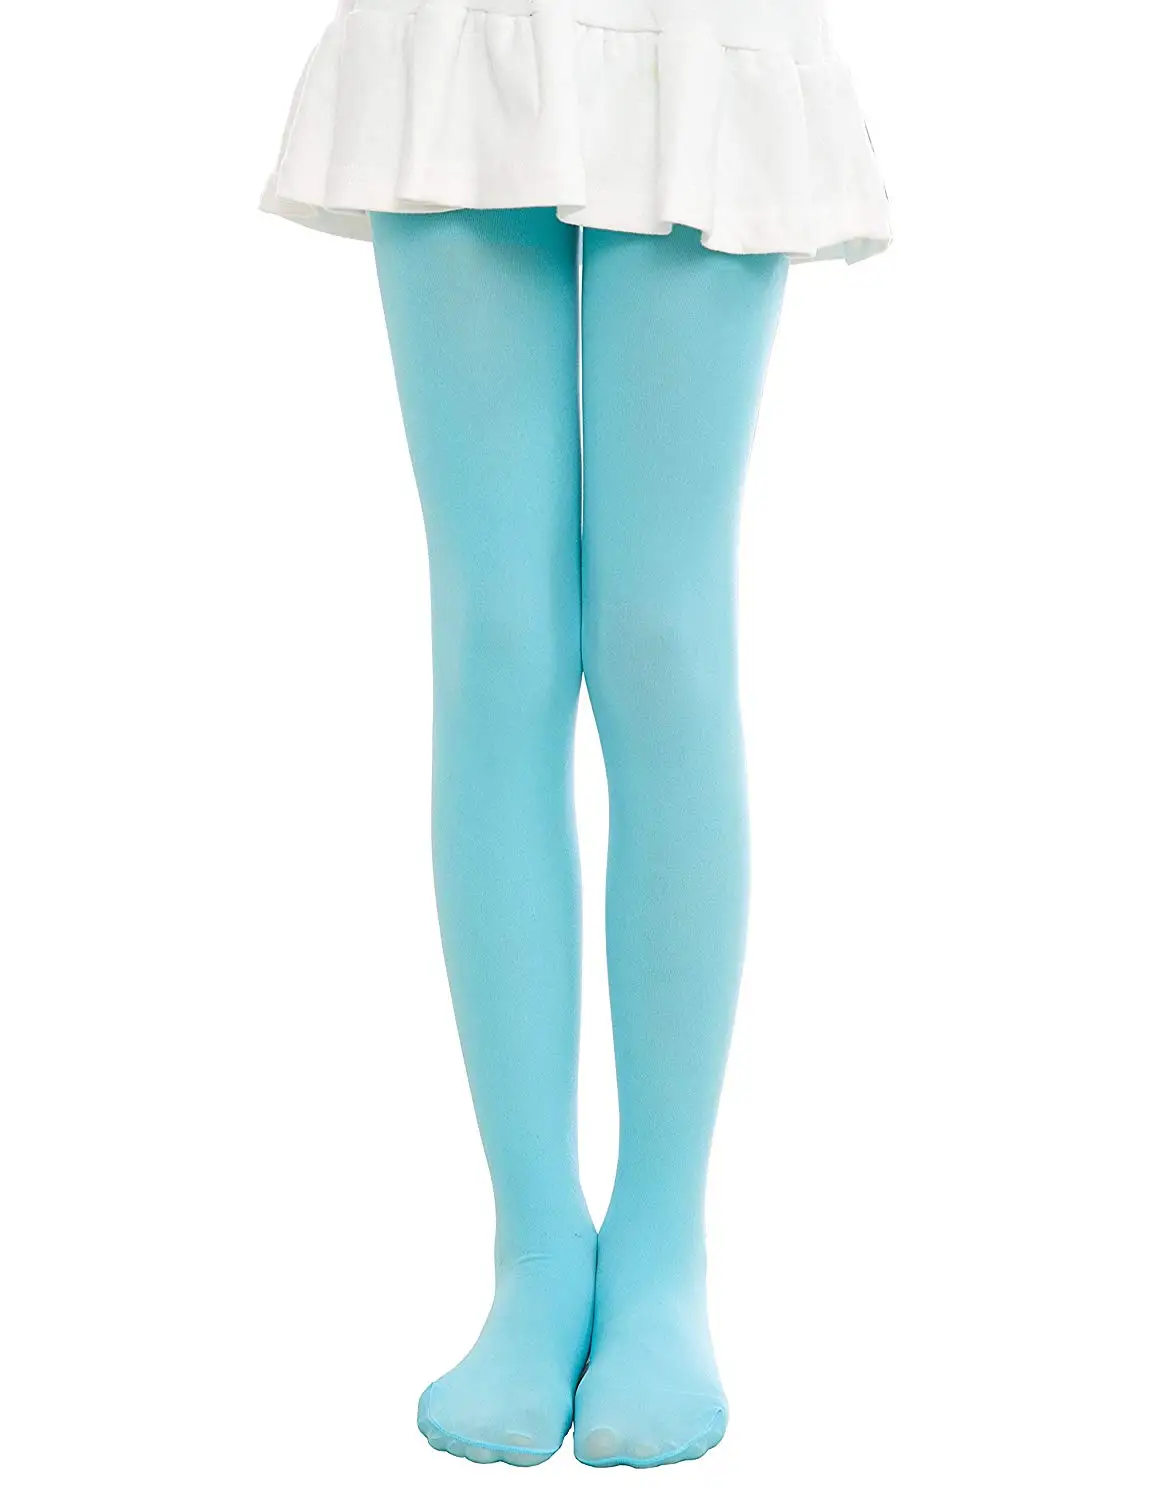 Buy Anlaey Ballet Dance Footed Tights Solid Colored Leggings Stockings ...